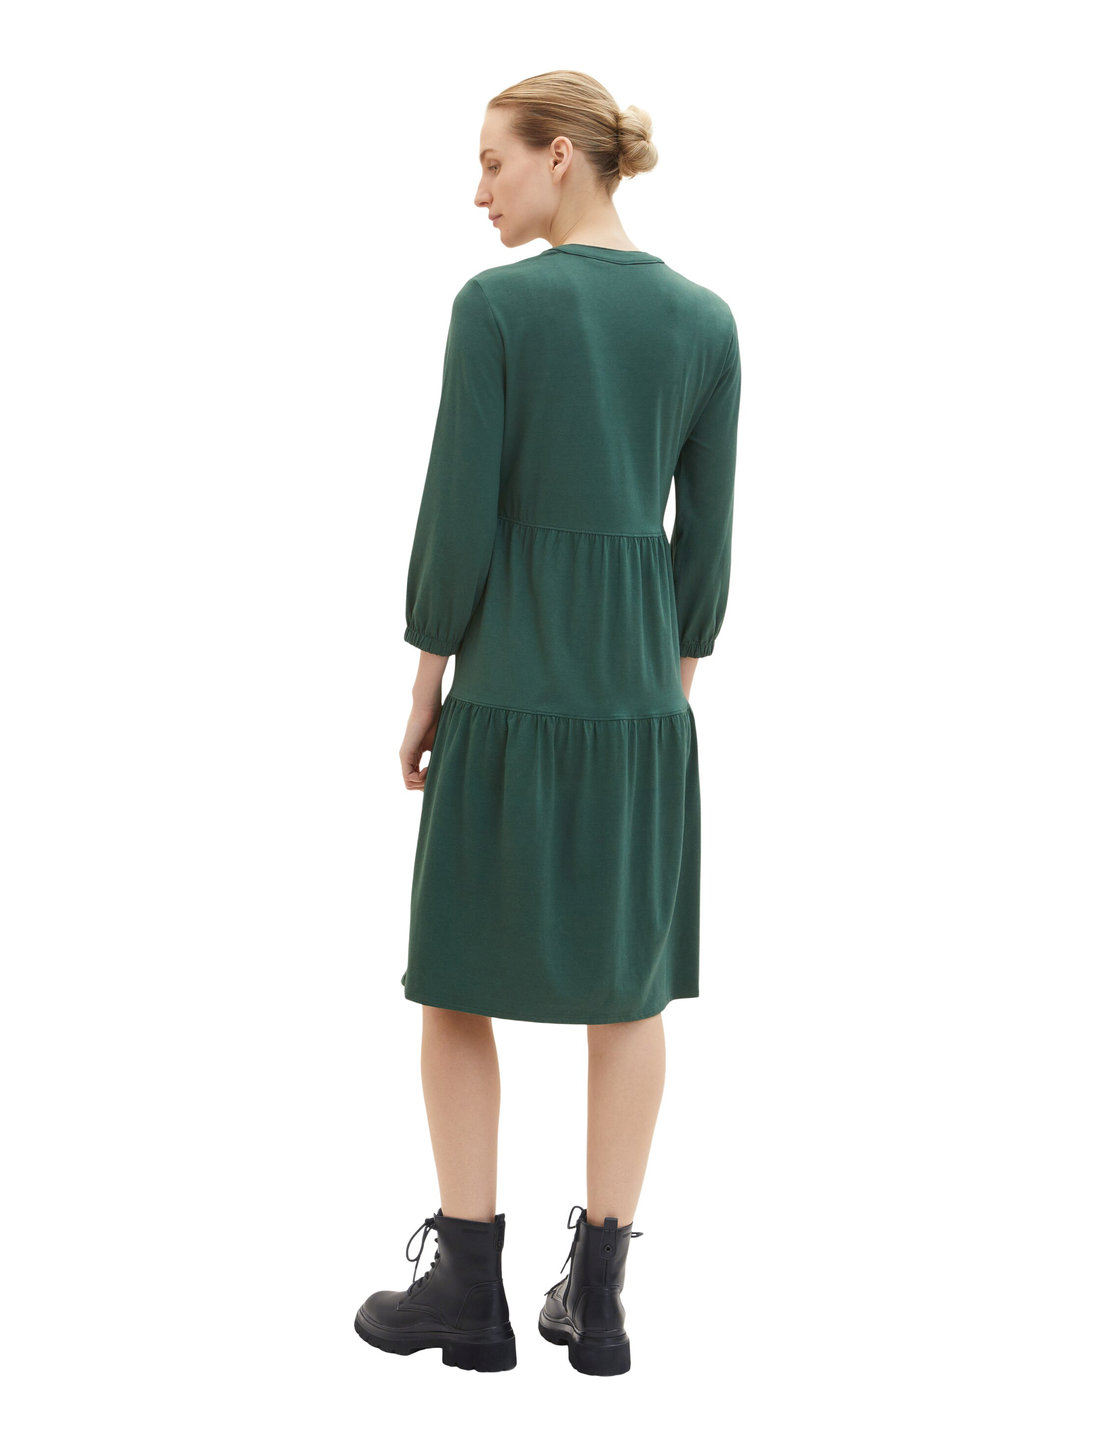 Tom Tailor Dress Jersey With Volants - Short Dresses